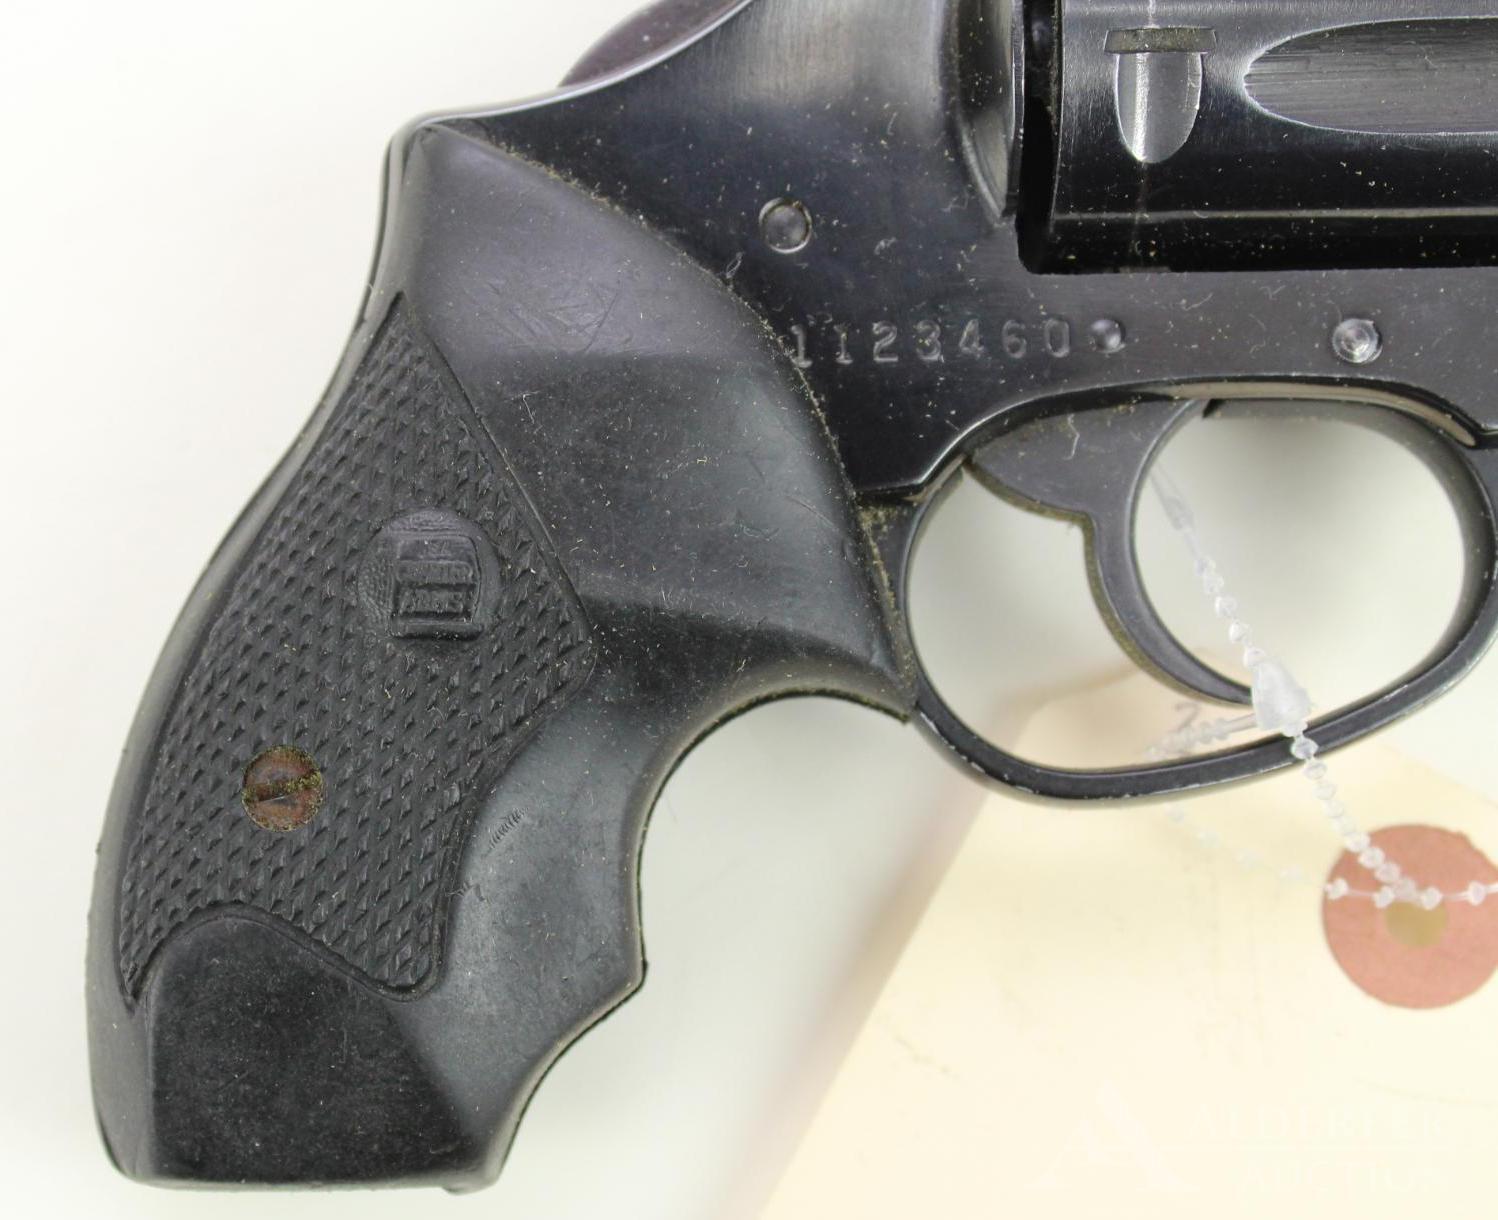 Charco Inc. Off Duty double action revolver.